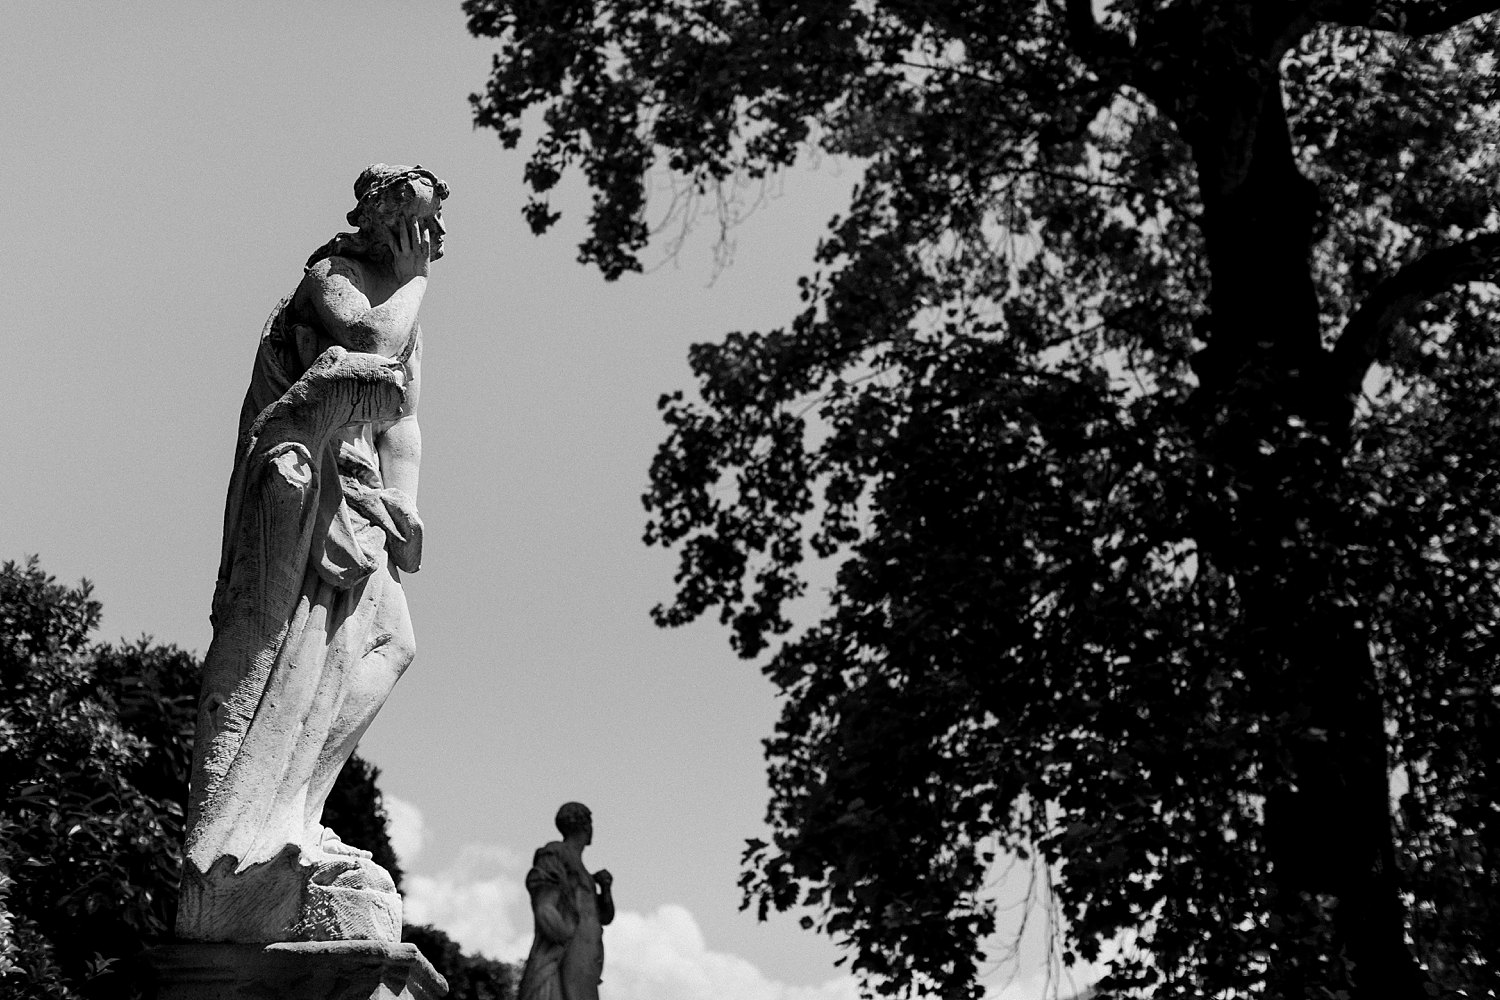 Black and white statue of person against sky